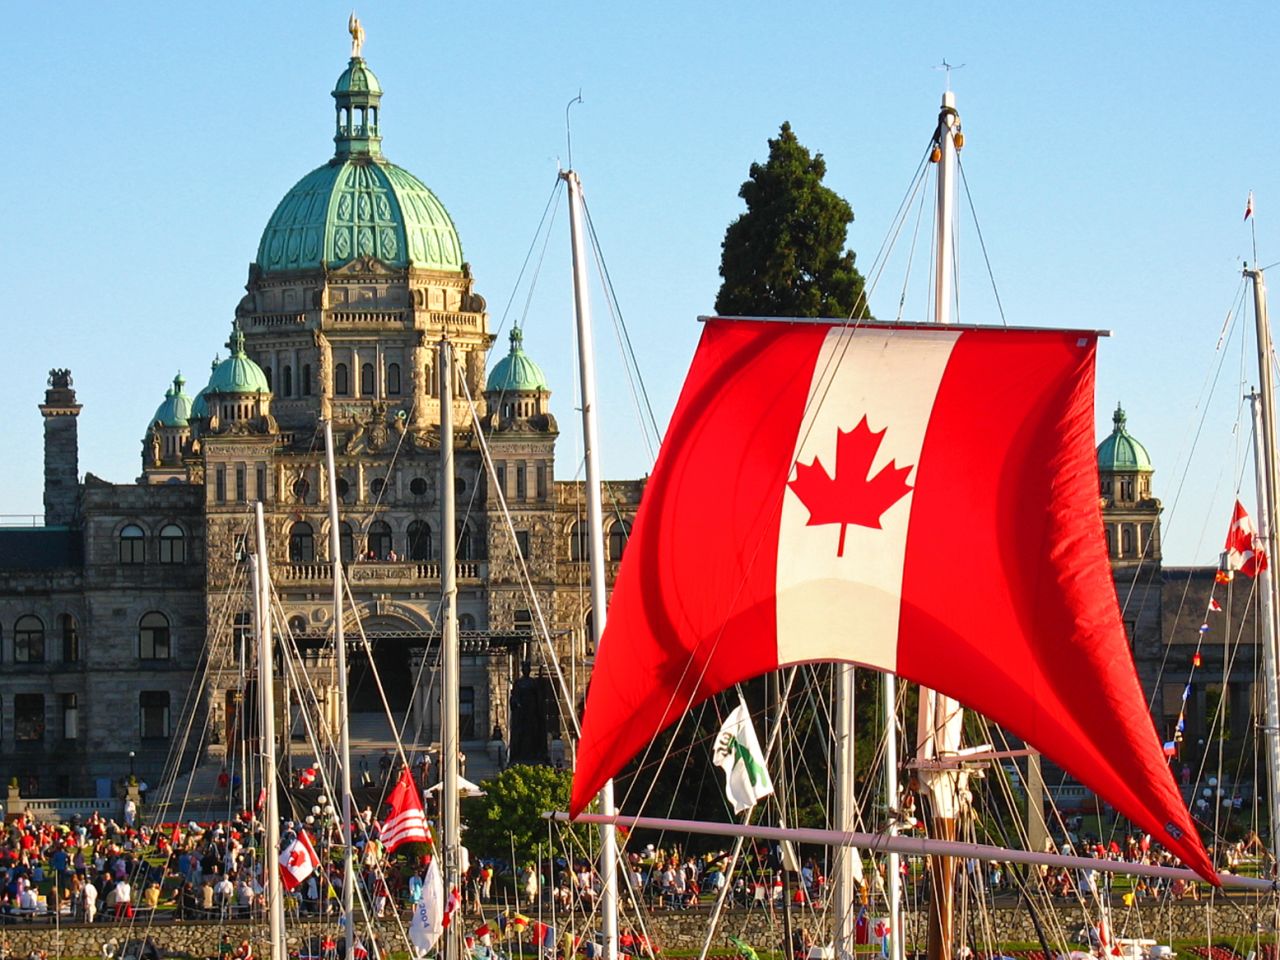 A friendly Canadian city? No chance. Just kidding, Victoria. What's more surprising is that the entire Conde Nast Traveler friendly cities list doesn't consist of Canuck destinations.